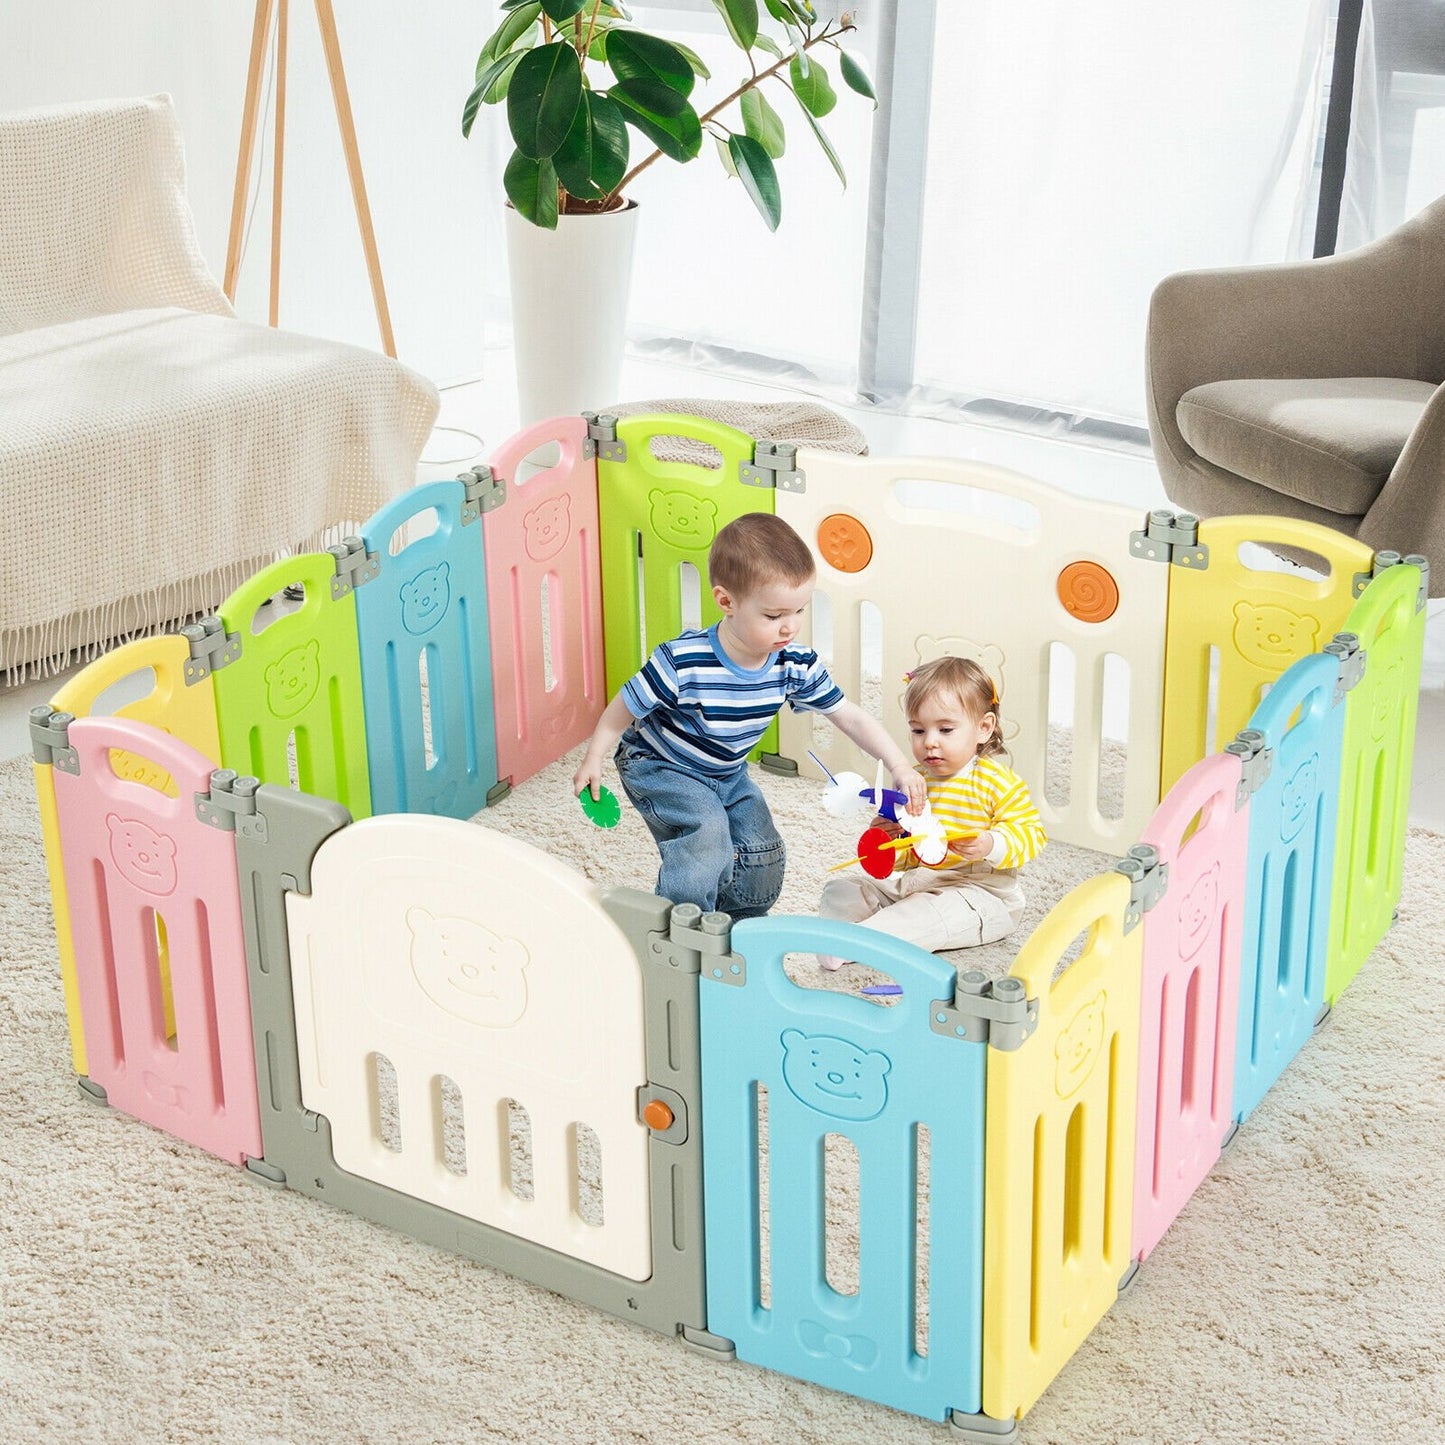 Foldable Baby Playpen 14 Panel Activity Center Safety Play Yard, Multicolor